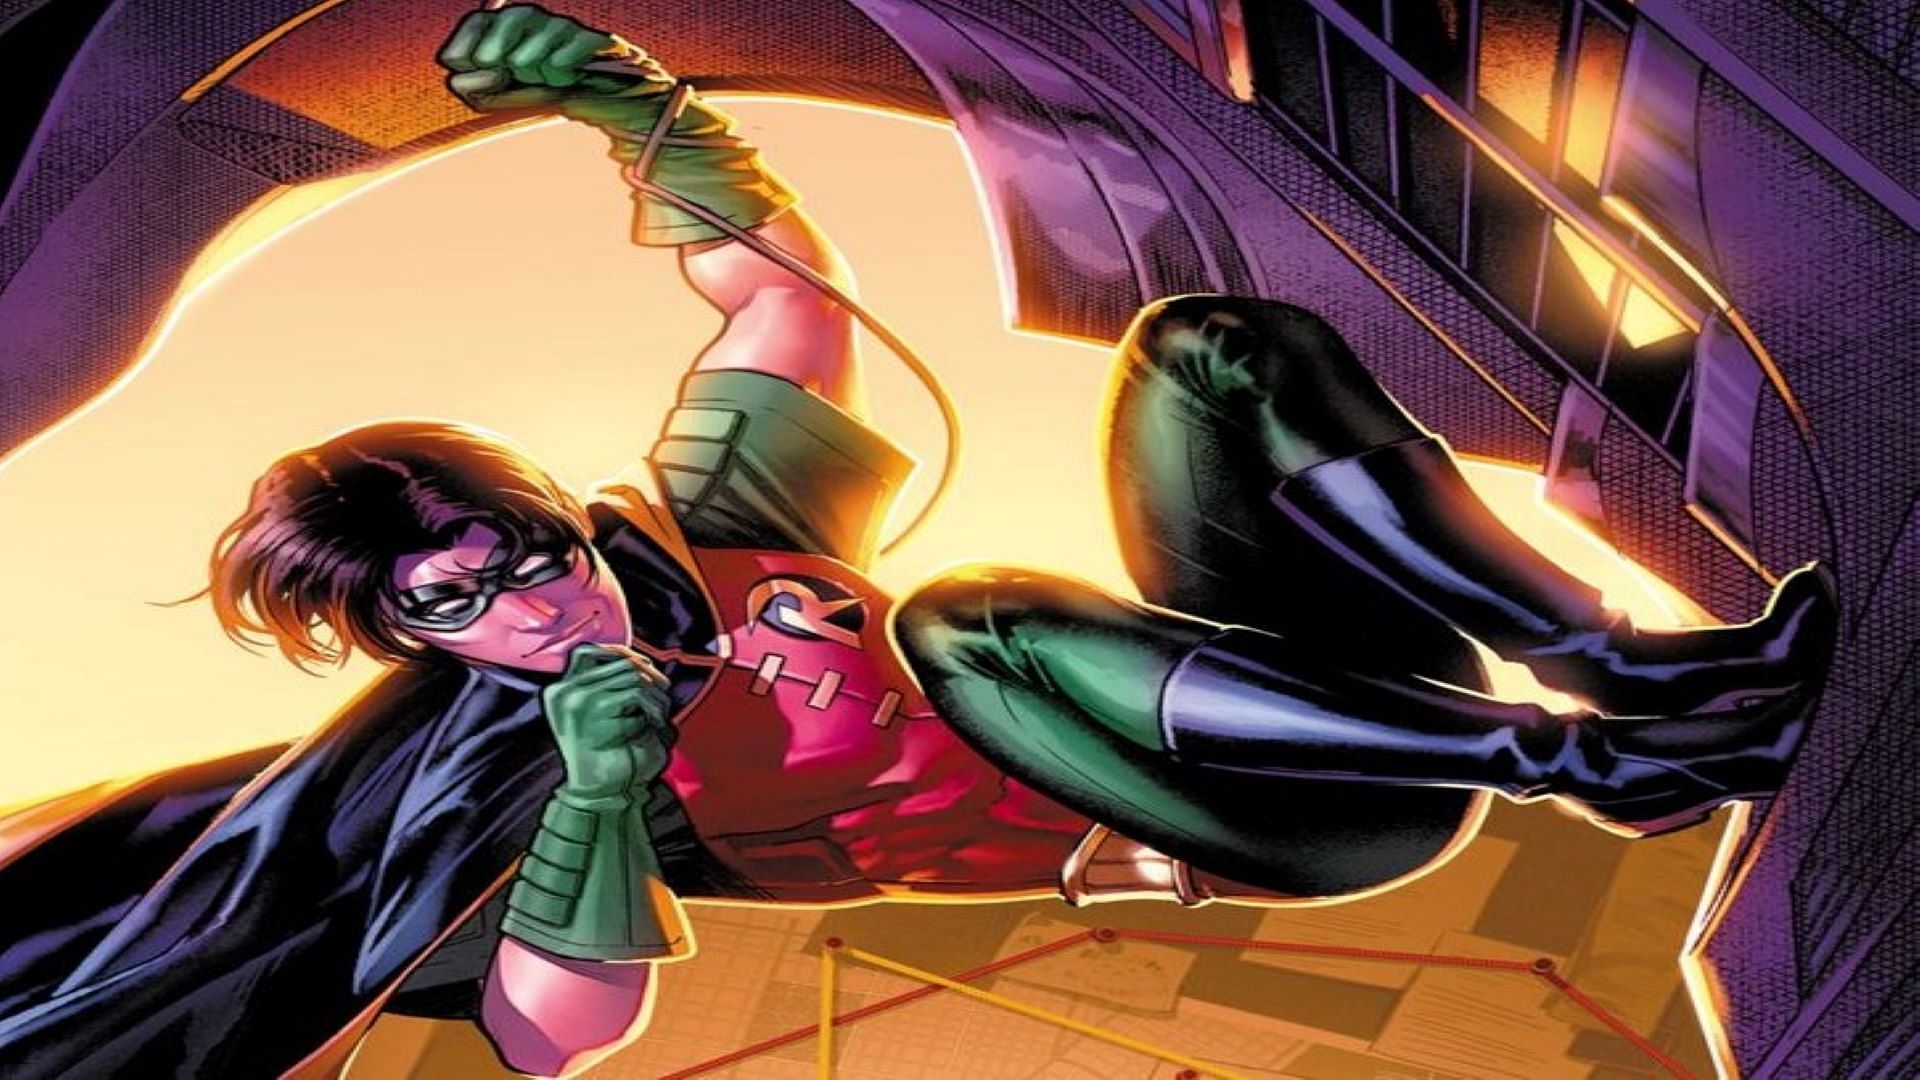 Robin explores his bisexuality in new Batman comic